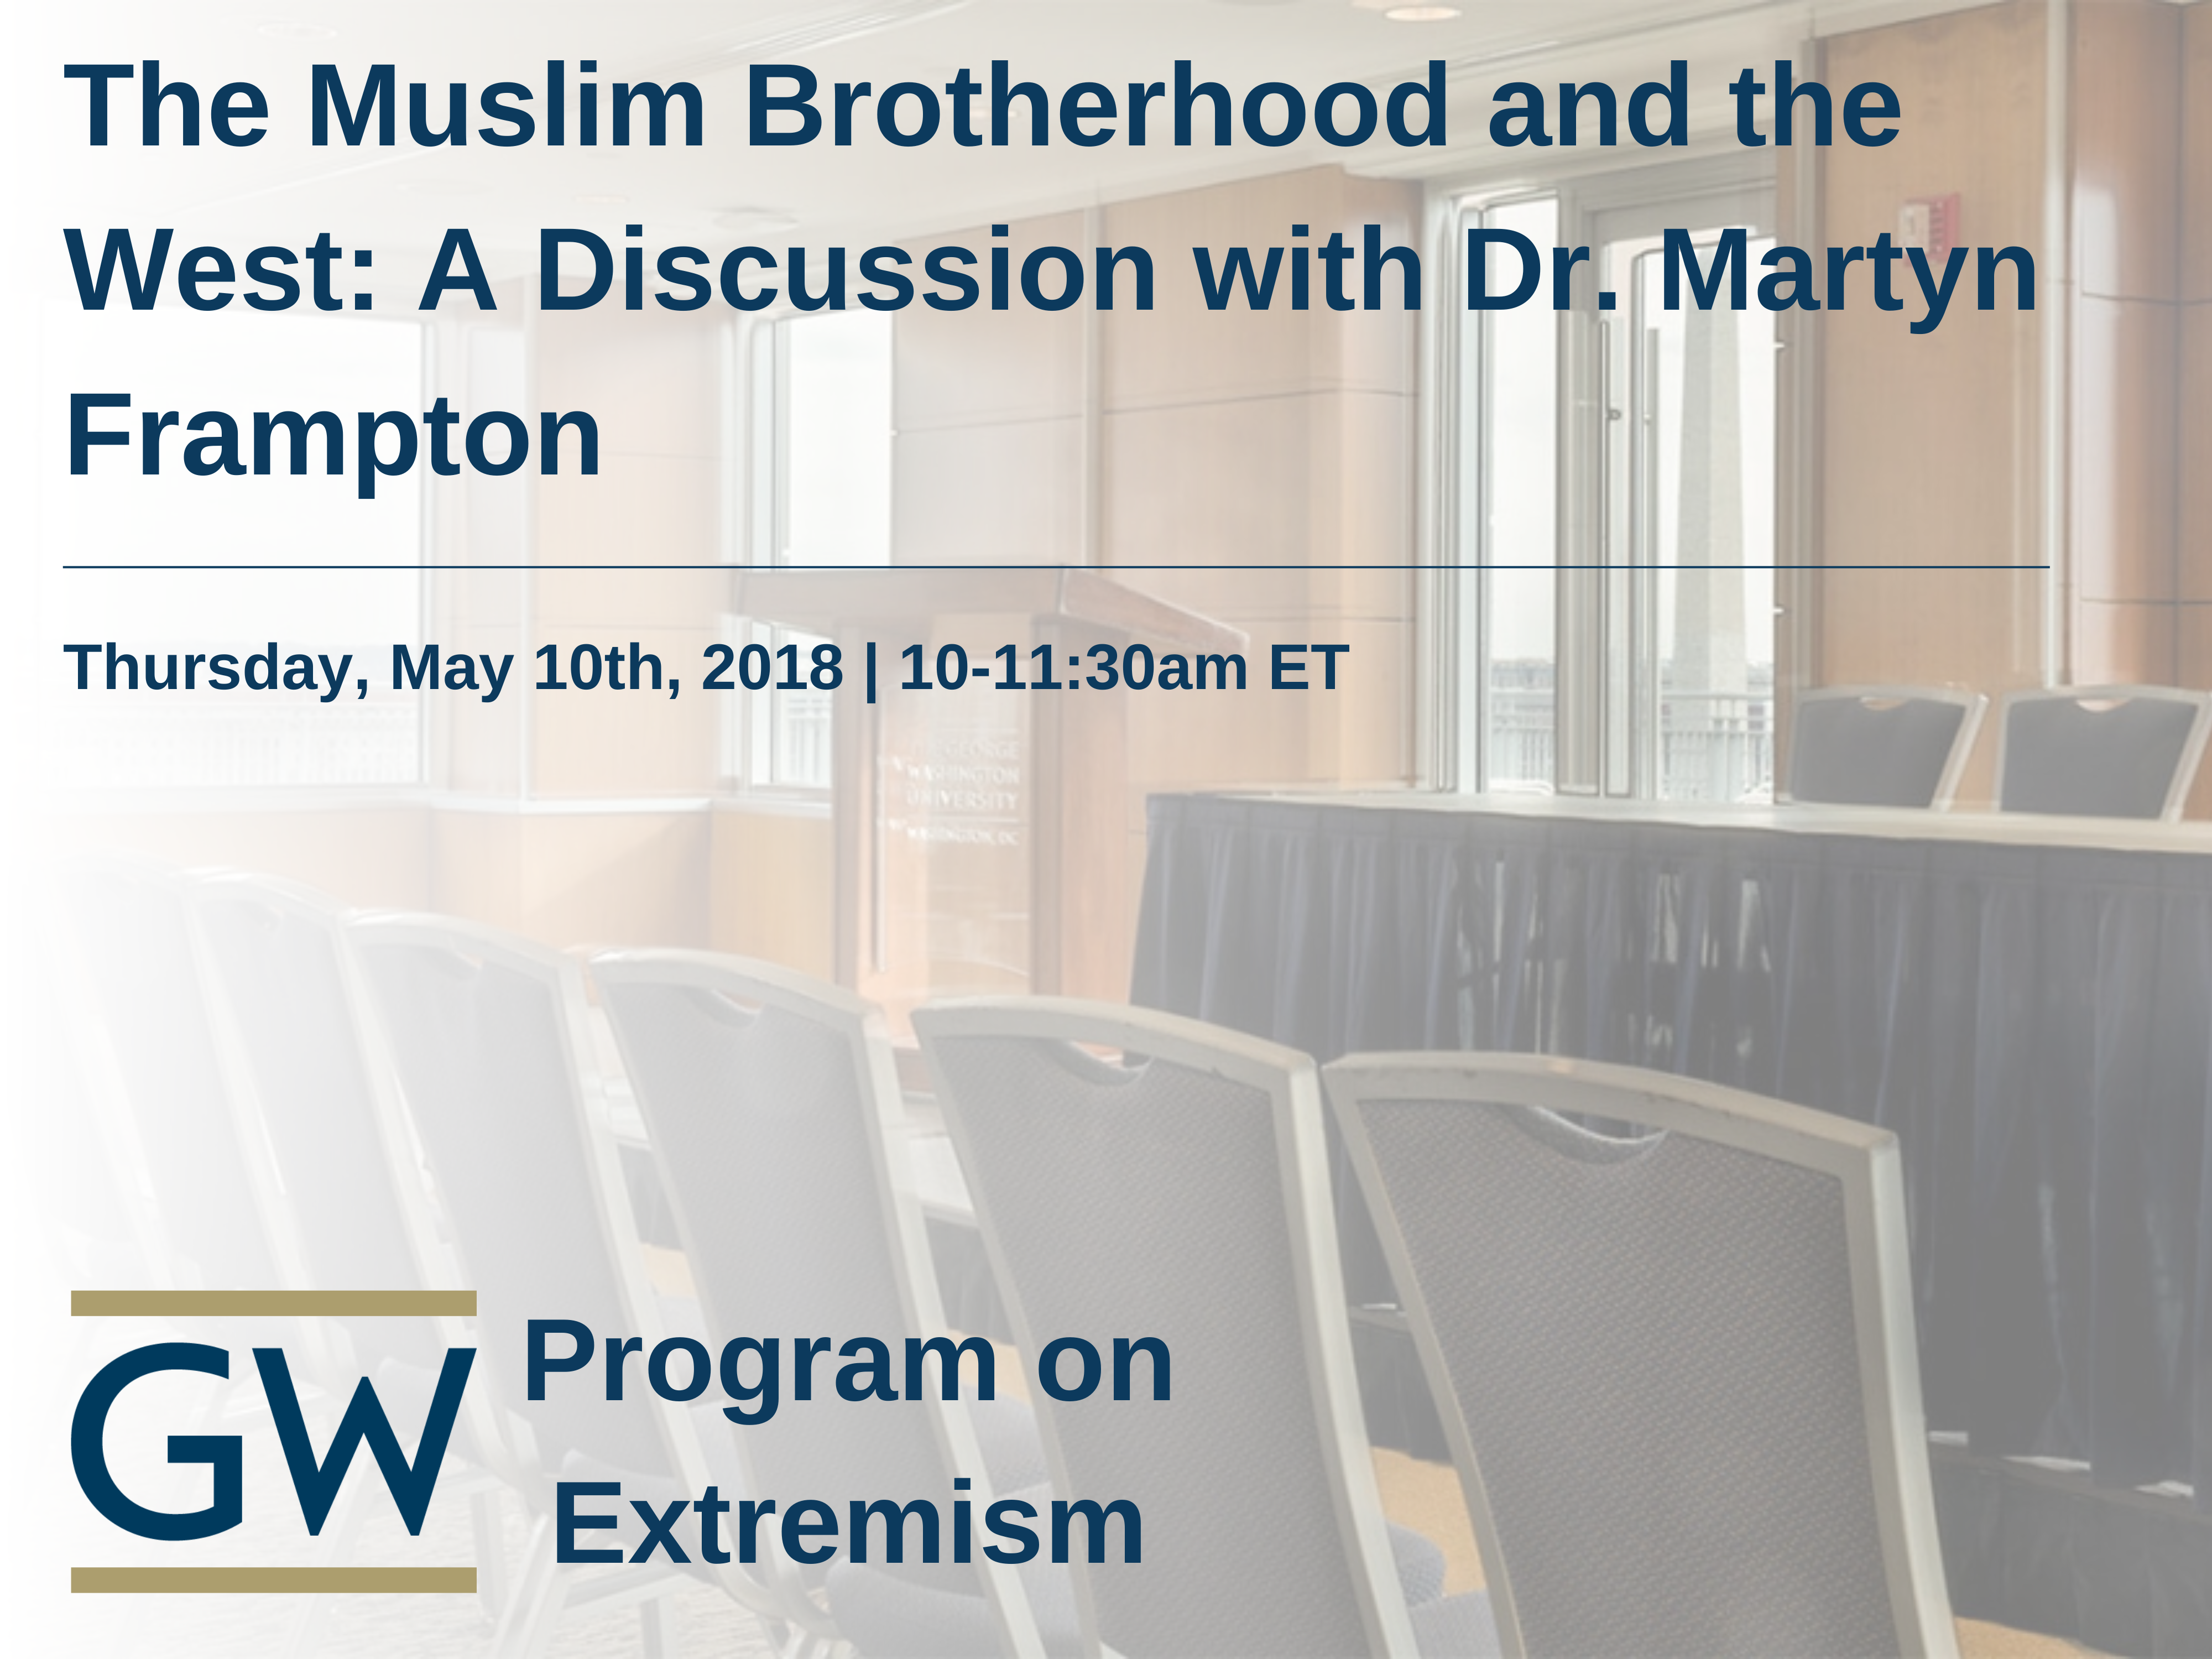 The Muslim Brotherhood and the West: A Discussion with Dr. Martyn Frampton Event Banner